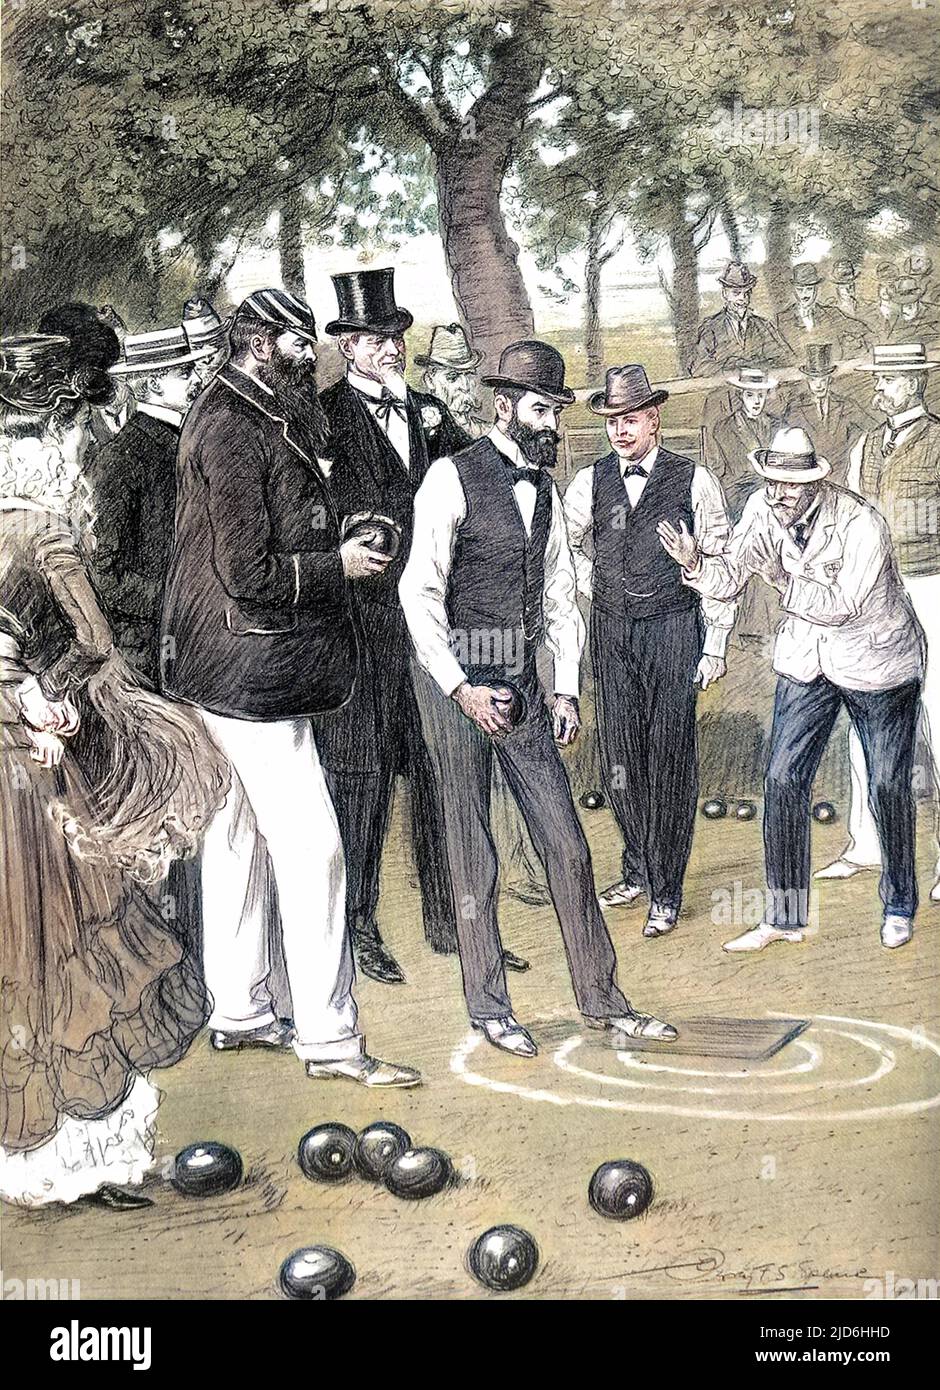 A match of bowls at the Crystal Palace in London during June 1901. The players shown are (from left to right) Dr. W.G. Grace (large beard), Mr. John Young (Australia), Mr. J.W. Dingles (New Zealand) and Mr. Owen McSolly (Abbey Park Club, Leicester). Colourised version of: 10220075       Date: 1901 Stock Photo